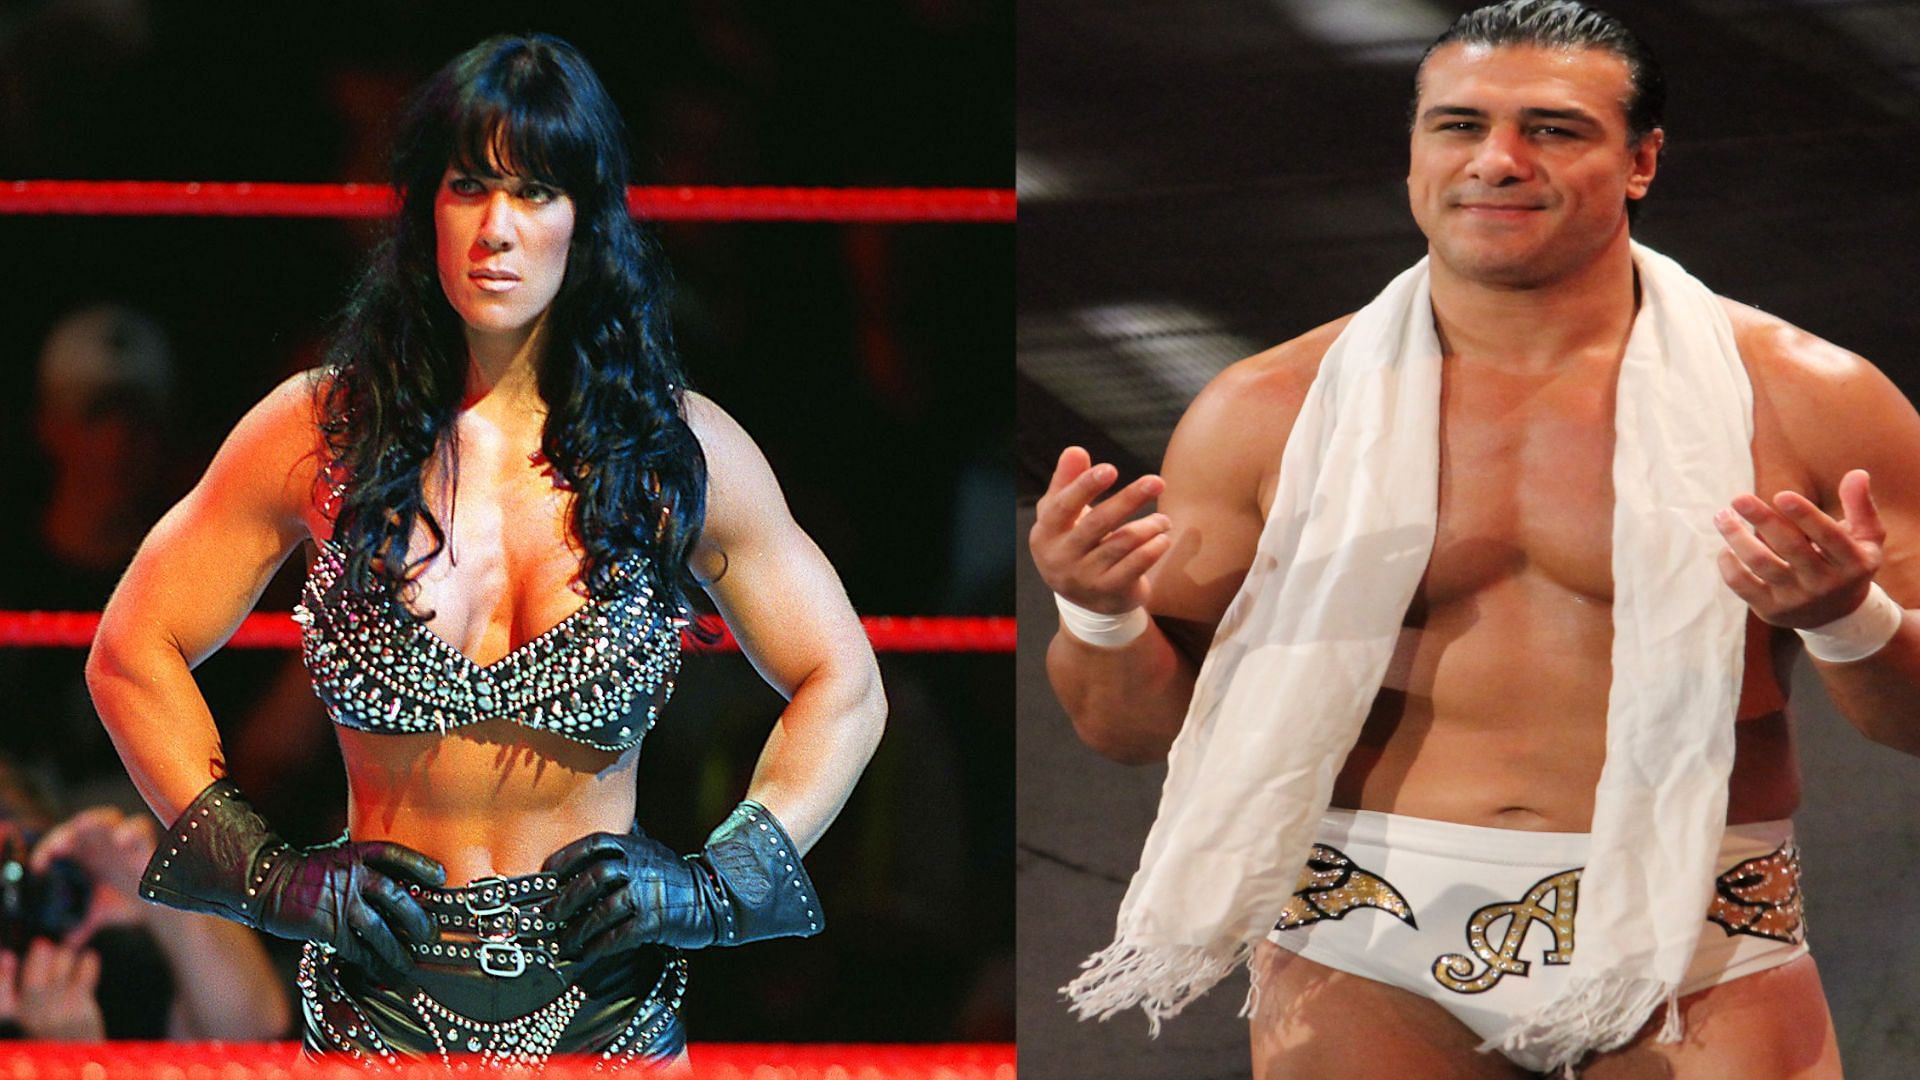 Alberto Del Rio and Chyna are just two of WWE